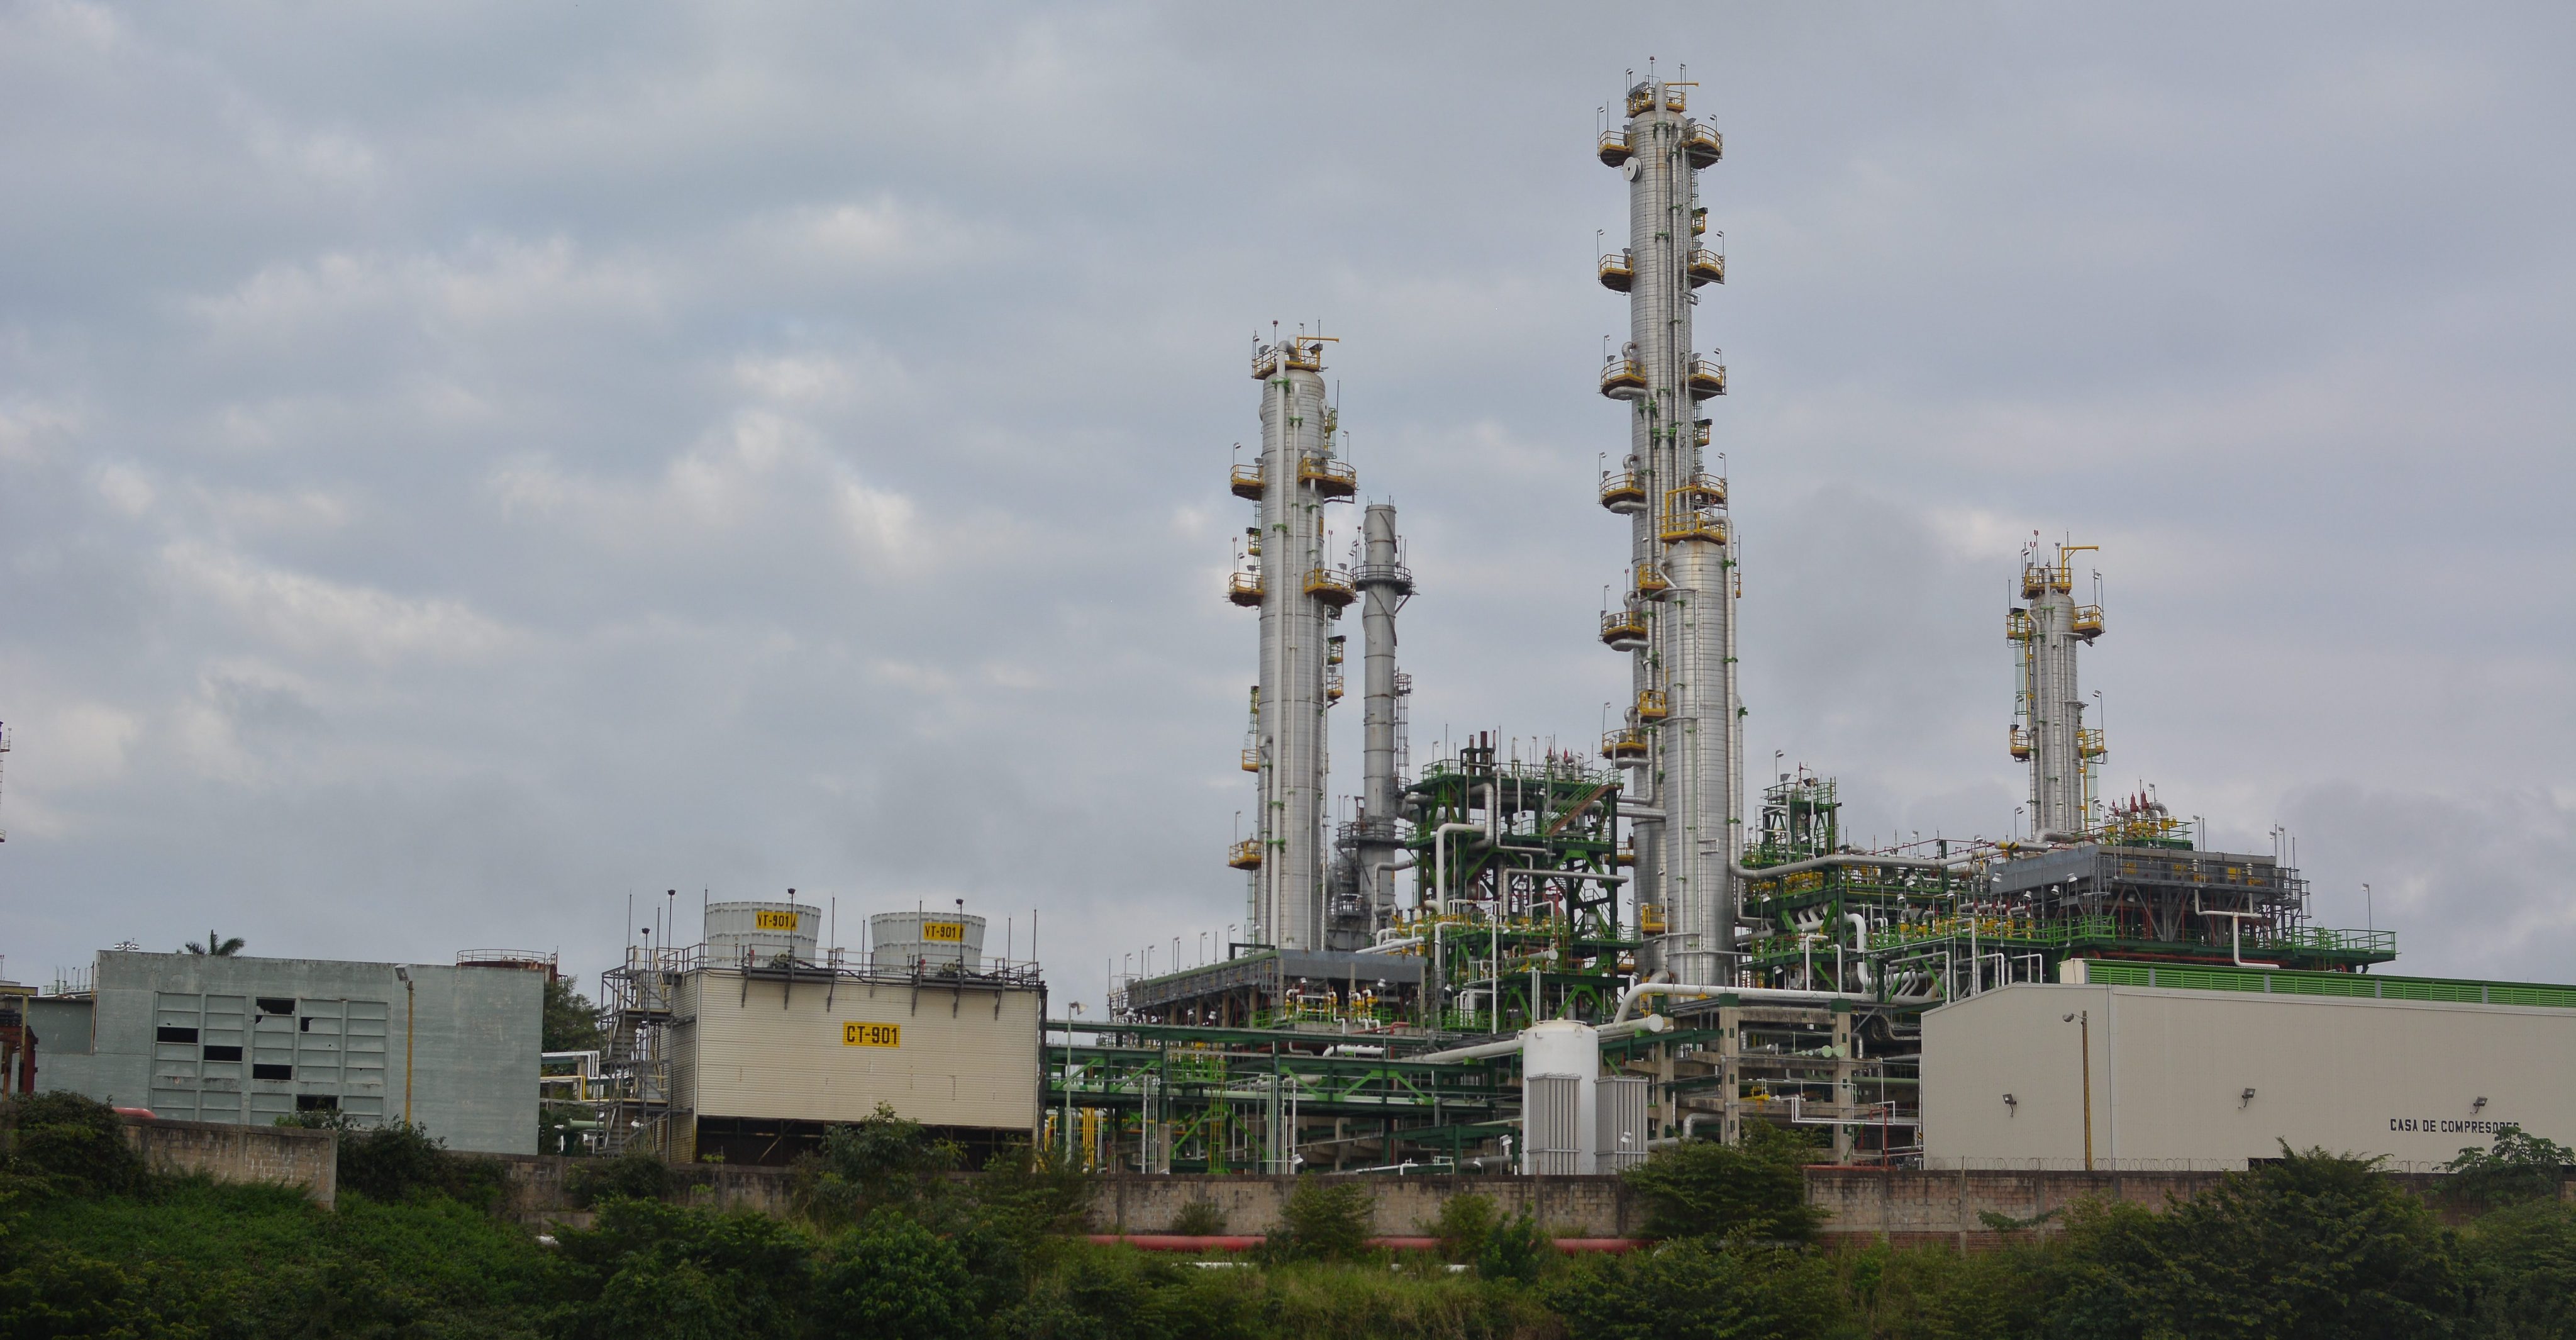 More than 40 years ago Pemex built its latest refinery